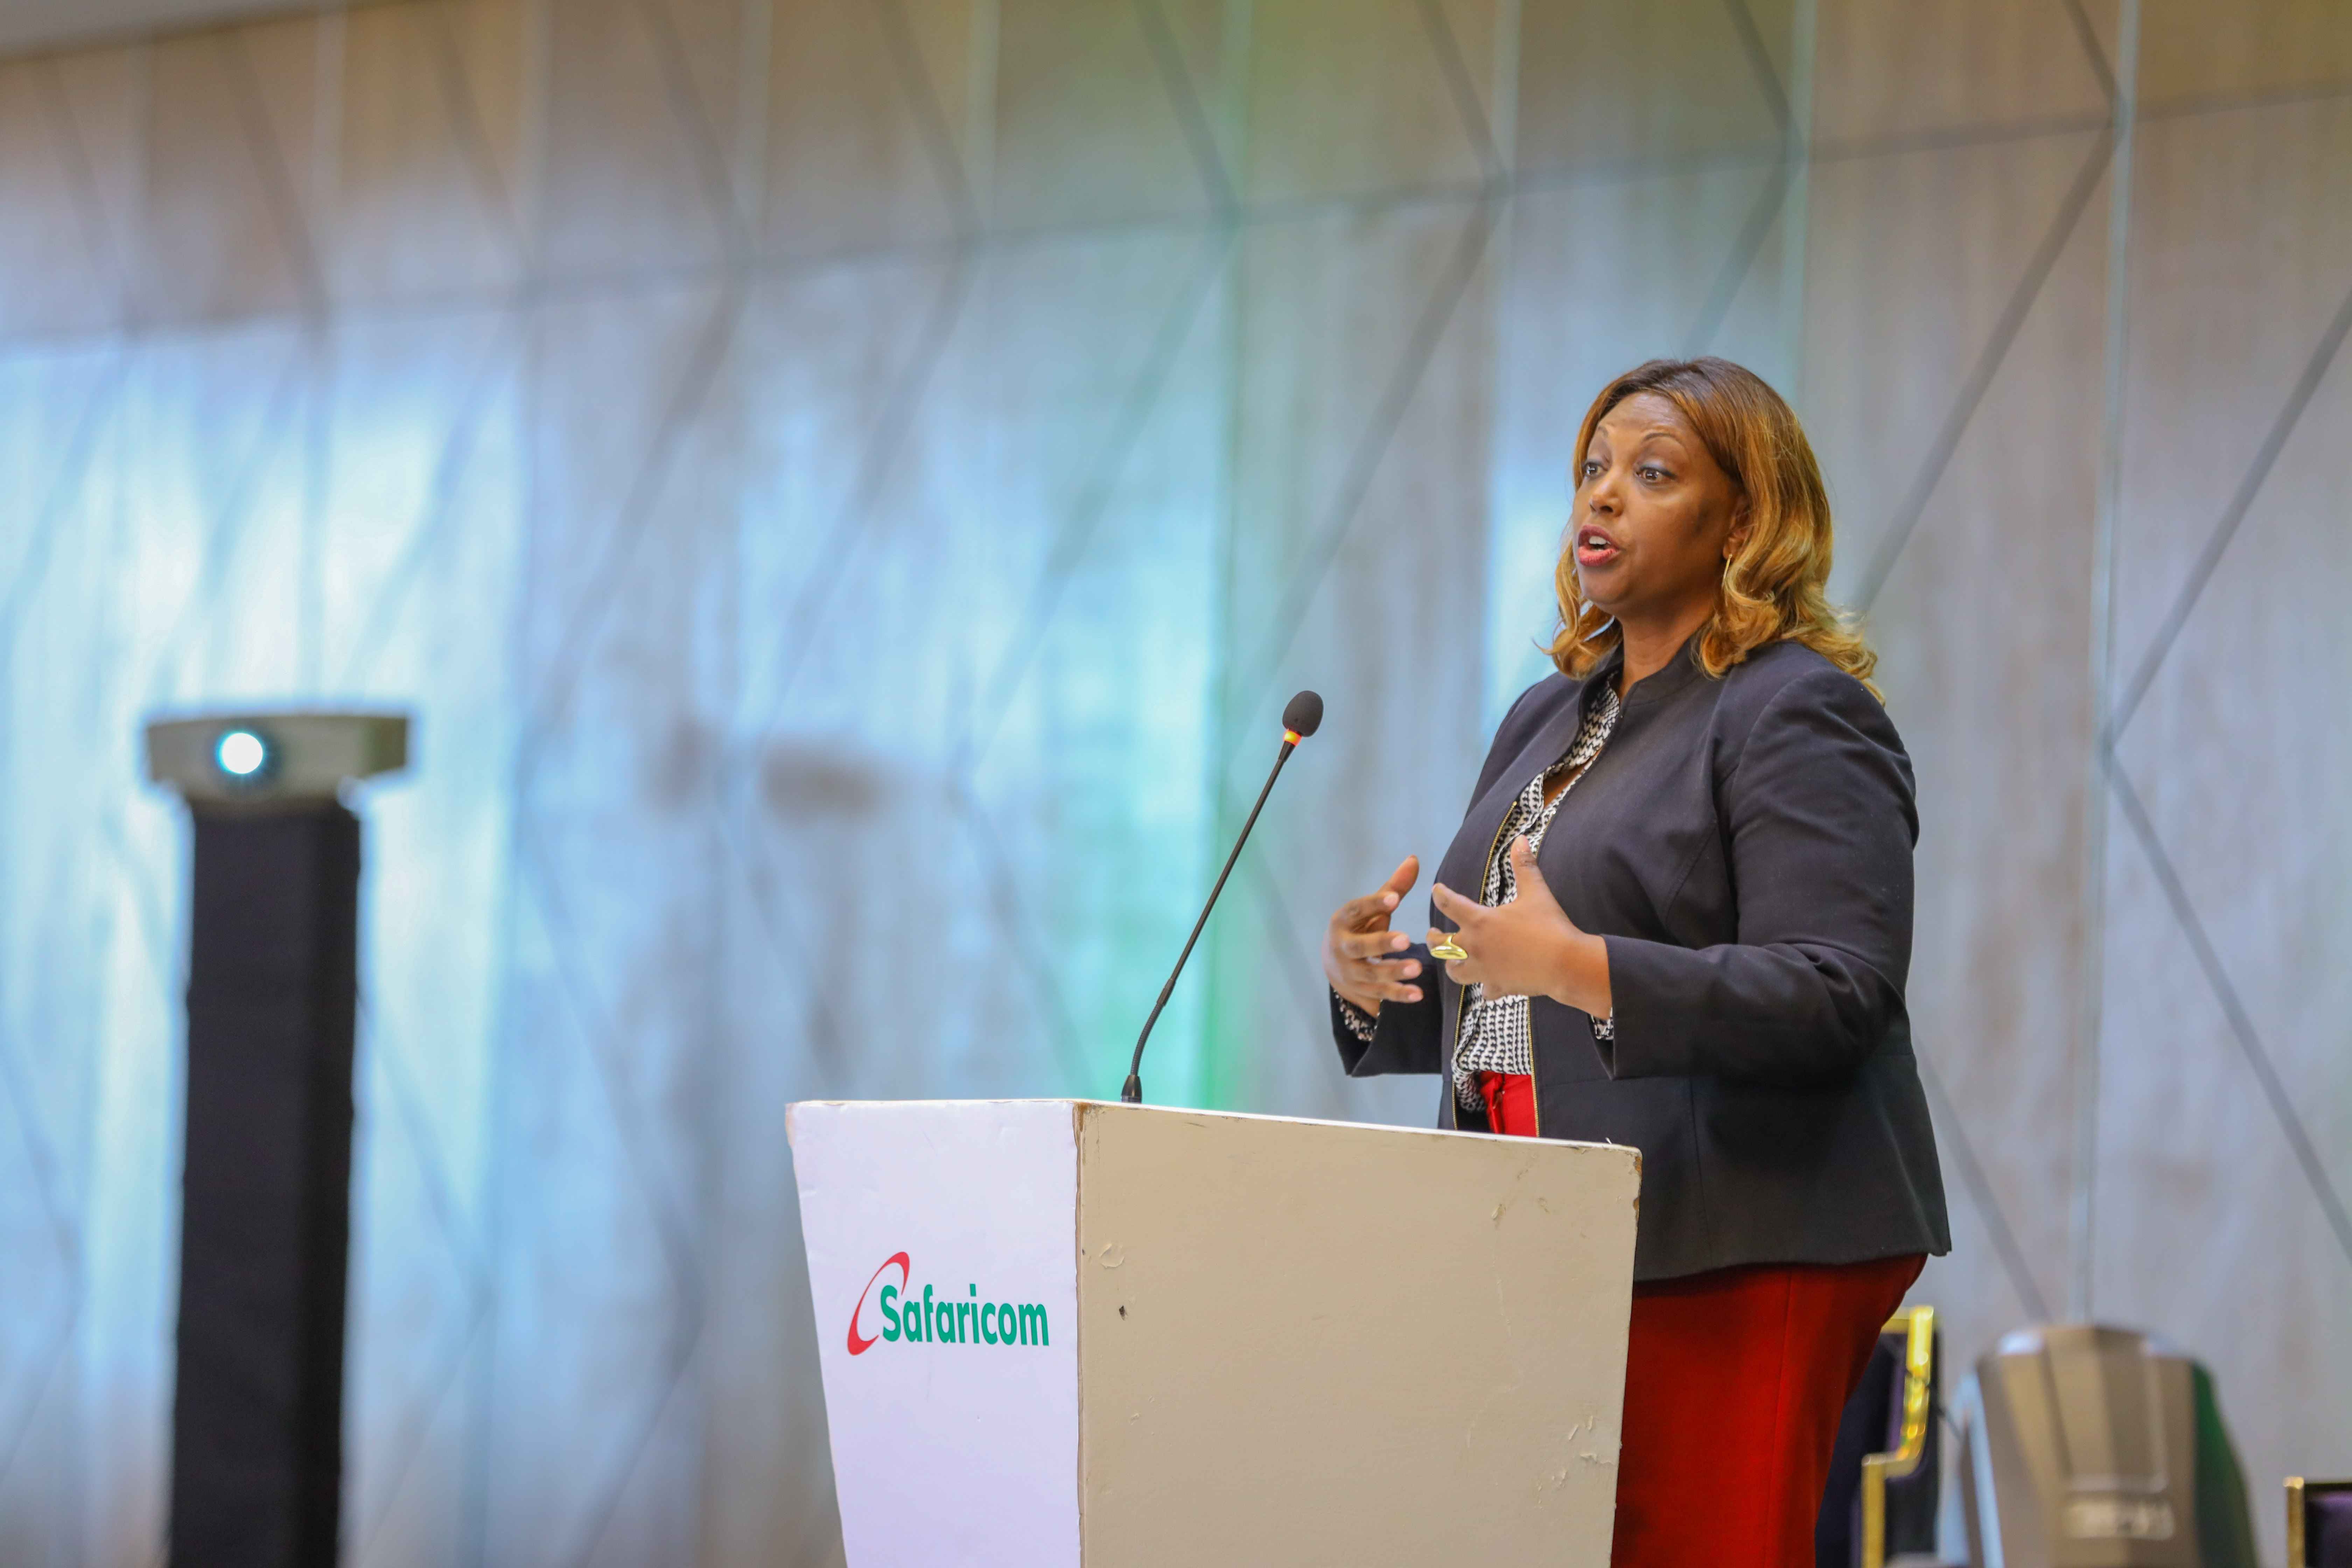 Safaricom PLC, Chief Enterprise Business Officer, Cynthia Kropac giving her speech at the Launch of Safaricom Business Resilience cloud.